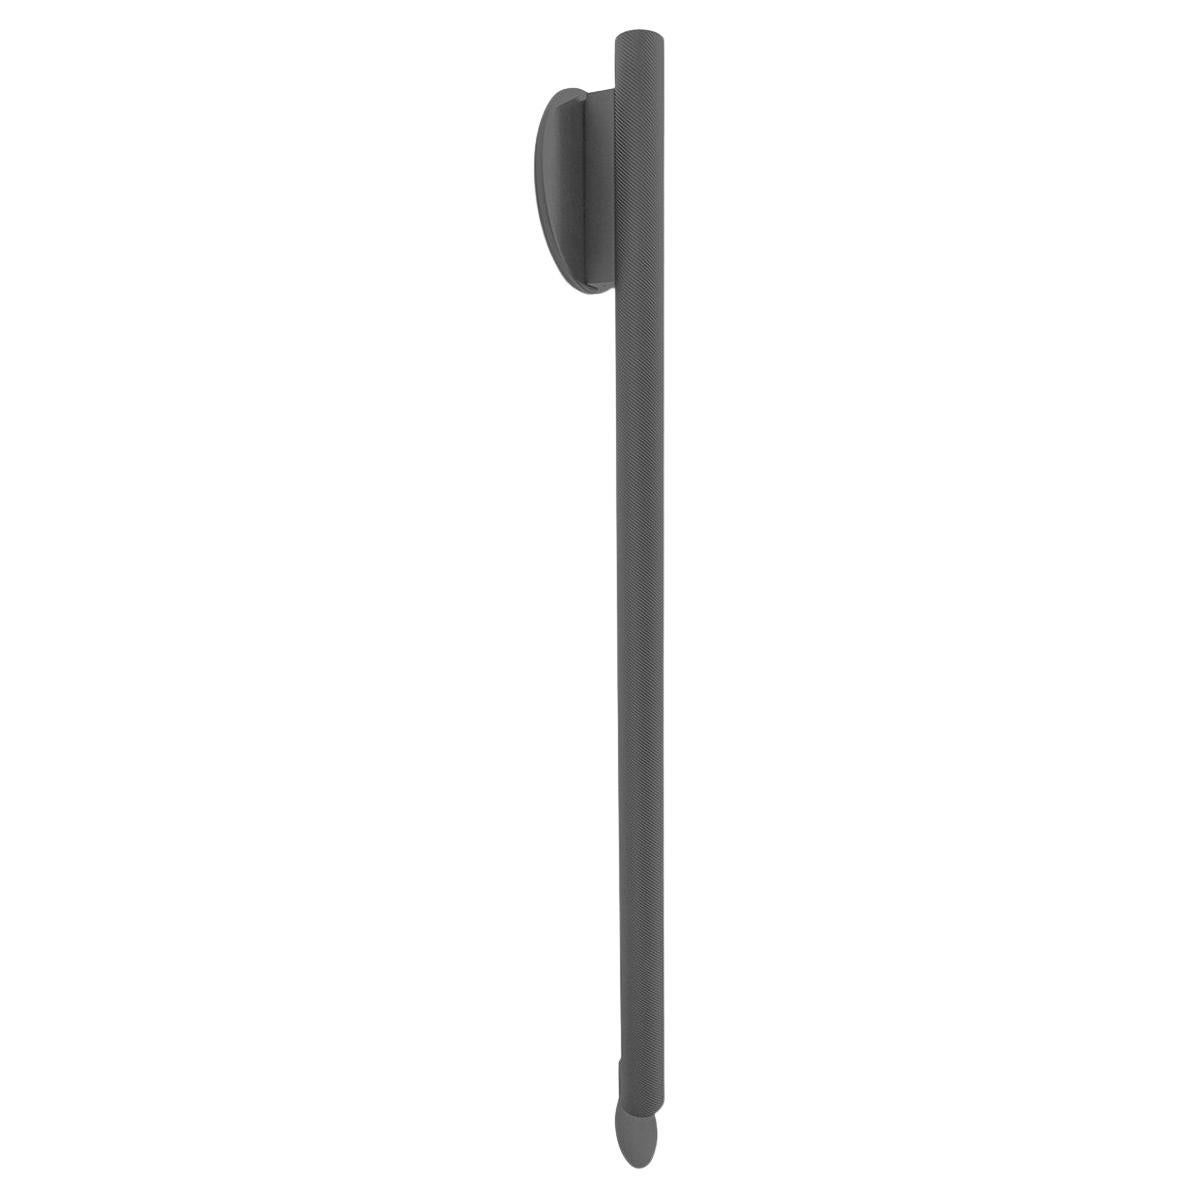 Flos Flauta Spiga 3000K Large Indoor/Outdoor Wall Sconce in Anthracite For Sale